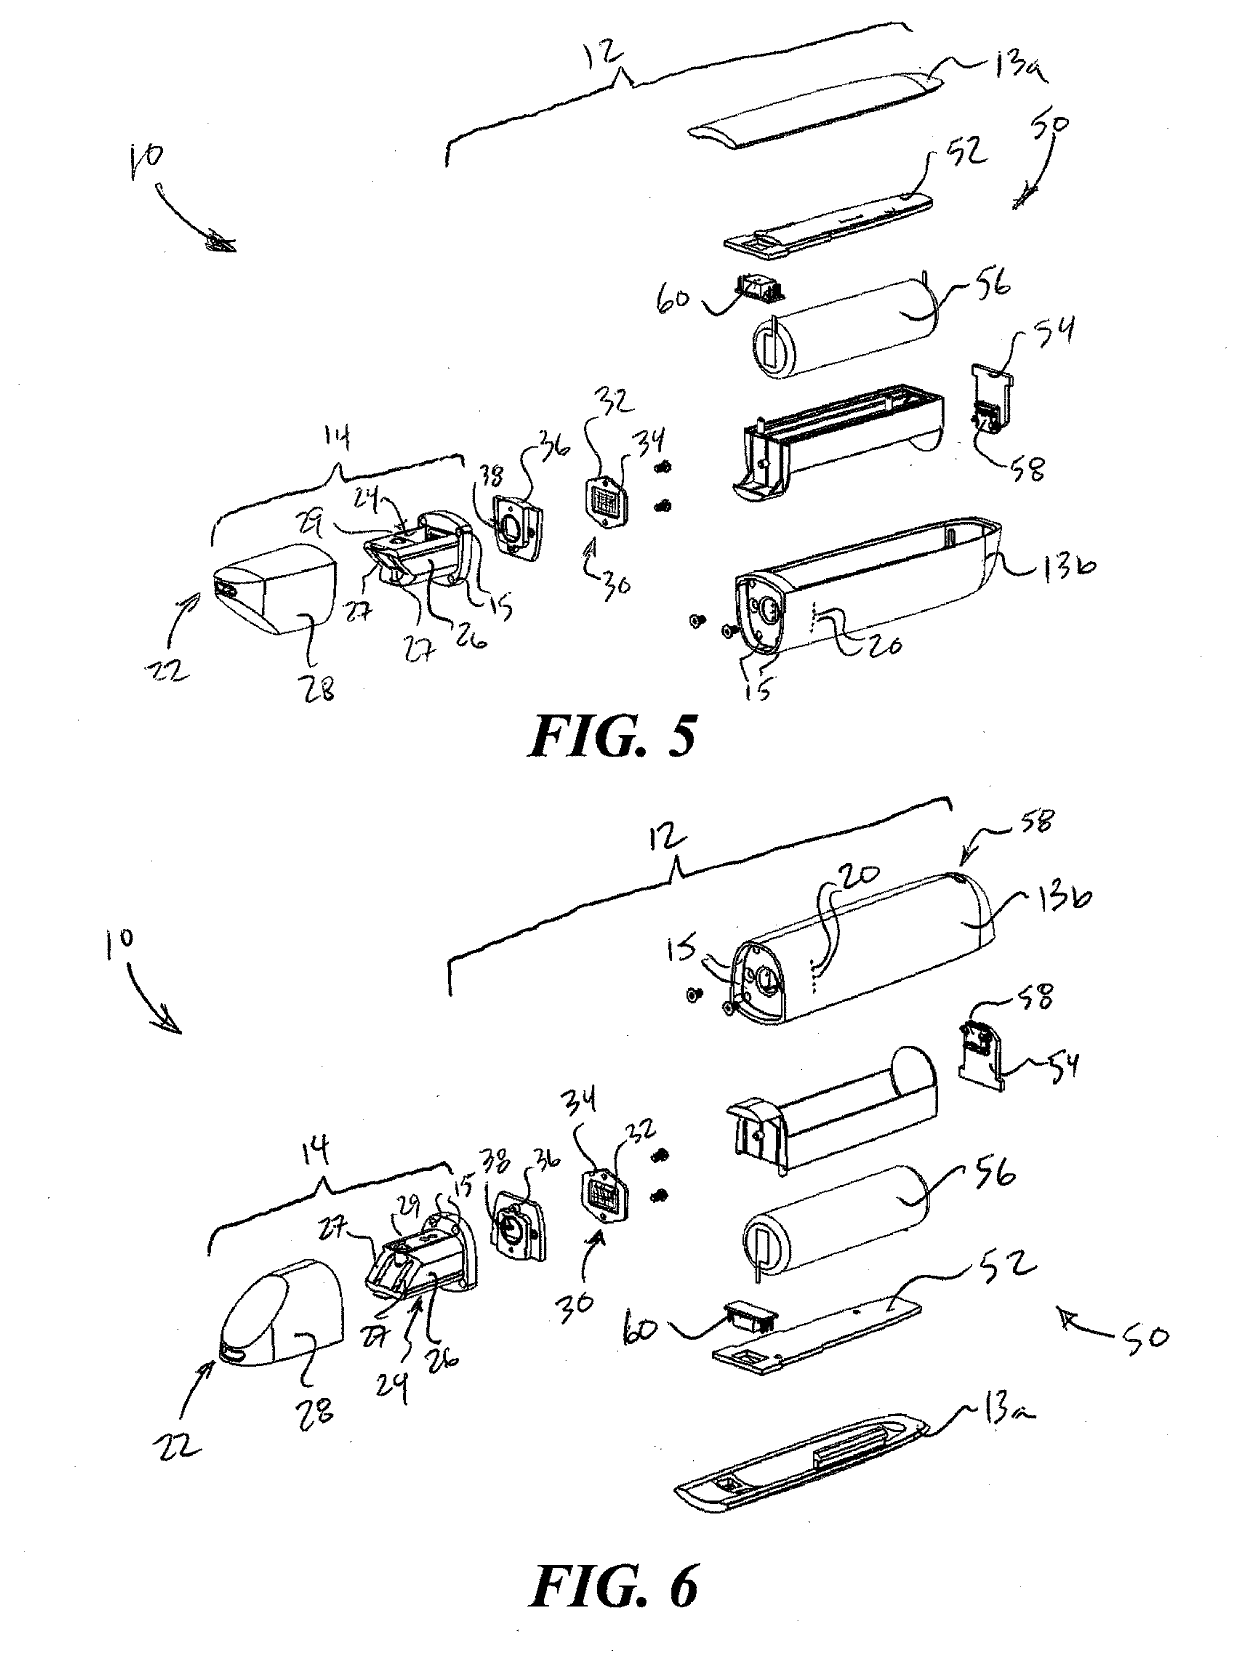 Vapor delivery systems and methods